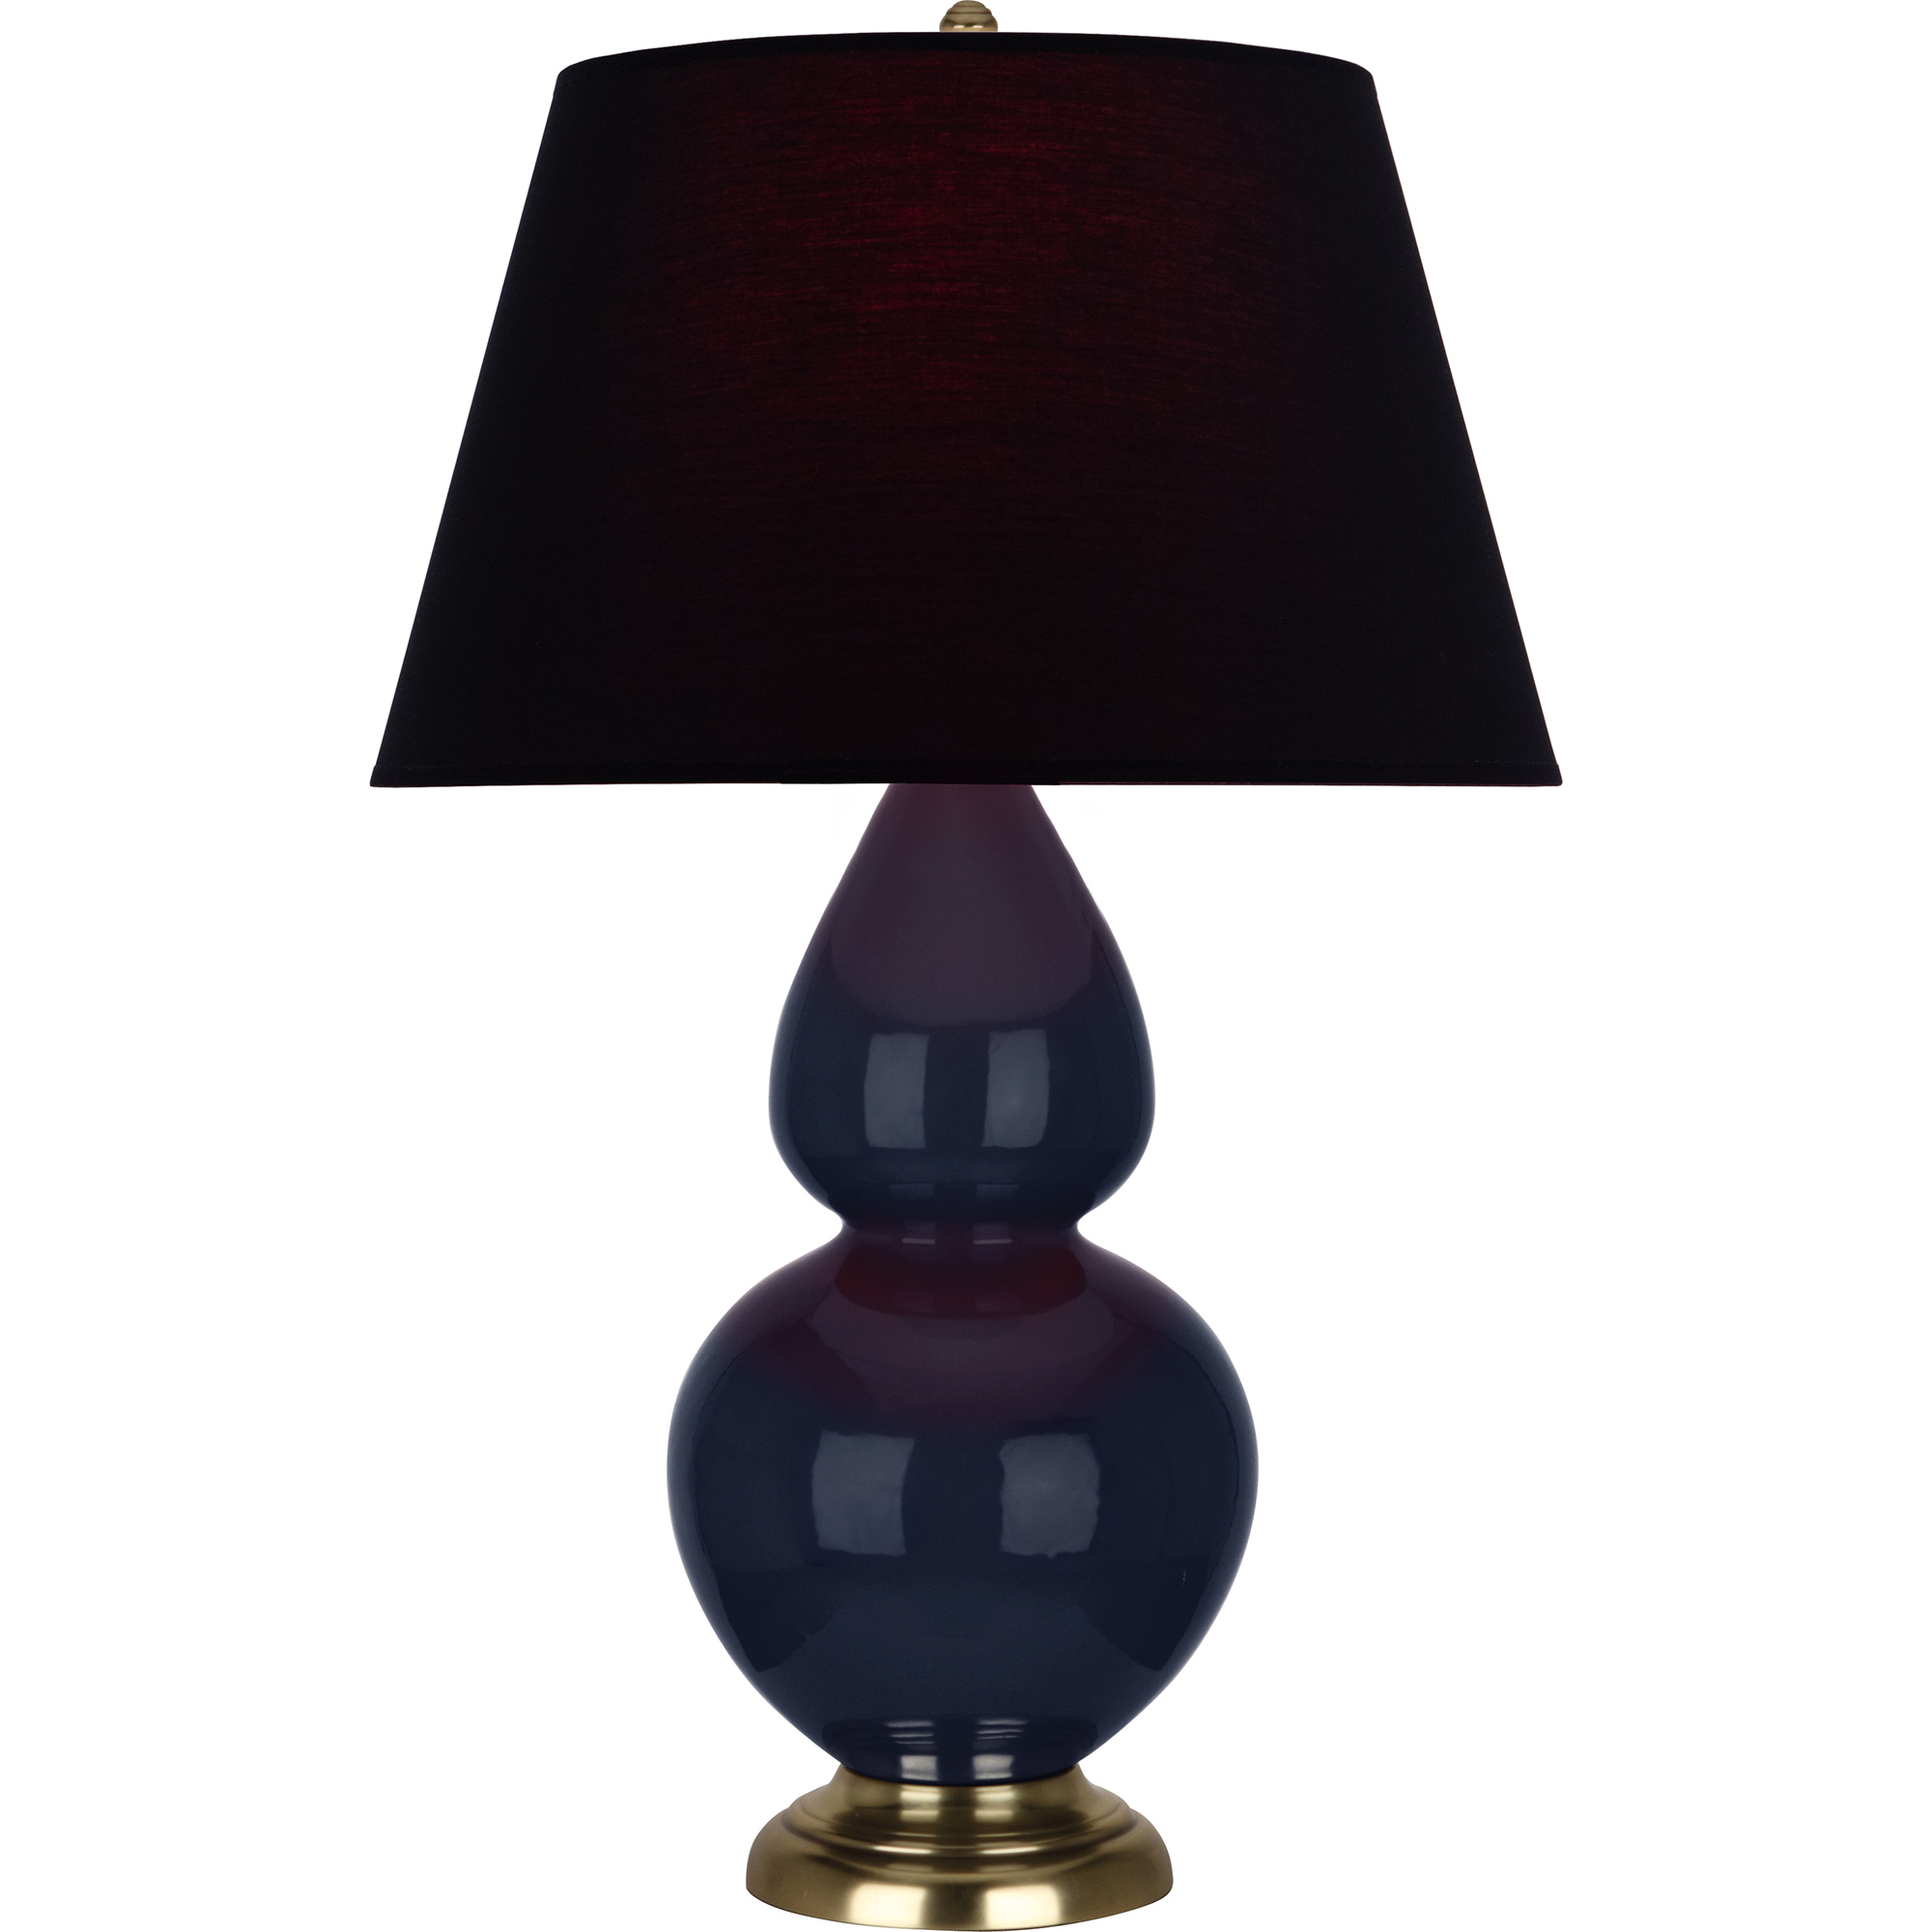 Double Gourd Table Lamp Style #MB20K